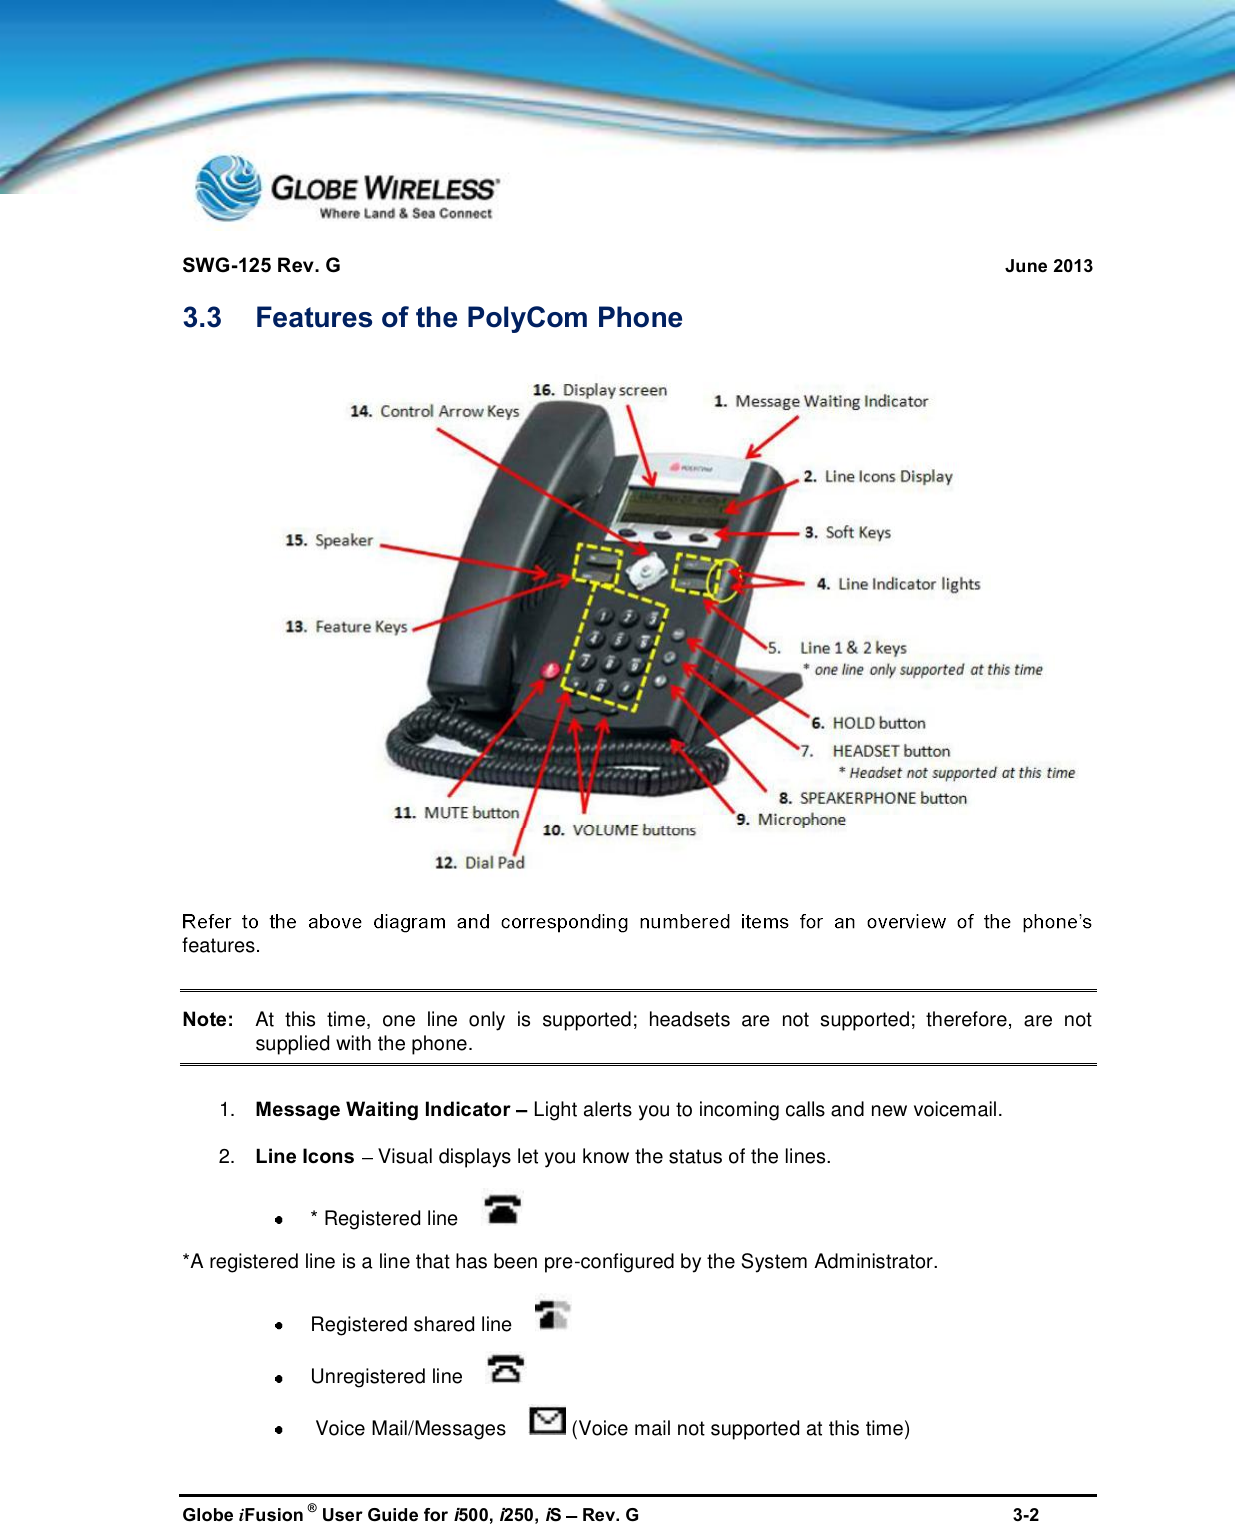 SWG-125 Rev. G June 2013Globe iFusion ®User Guide for i500, i250, iSRev. G 3-23.3 Features of the PolyCom Phonefeatures.Note: At this time, one line only is supported; headsets are not supported; therefore, are notsupplied with the phone.1. Message Waiting Indicator Light alerts you to incoming calls and new voicemail.2. Line Icons Visual displays let you know the status of the lines.* Registered line*A registered line is a line that has been pre-configured by the System Administrator.Registered shared lineUnregistered lineVoice Mail/Messages (Voice mail not supported at this time)